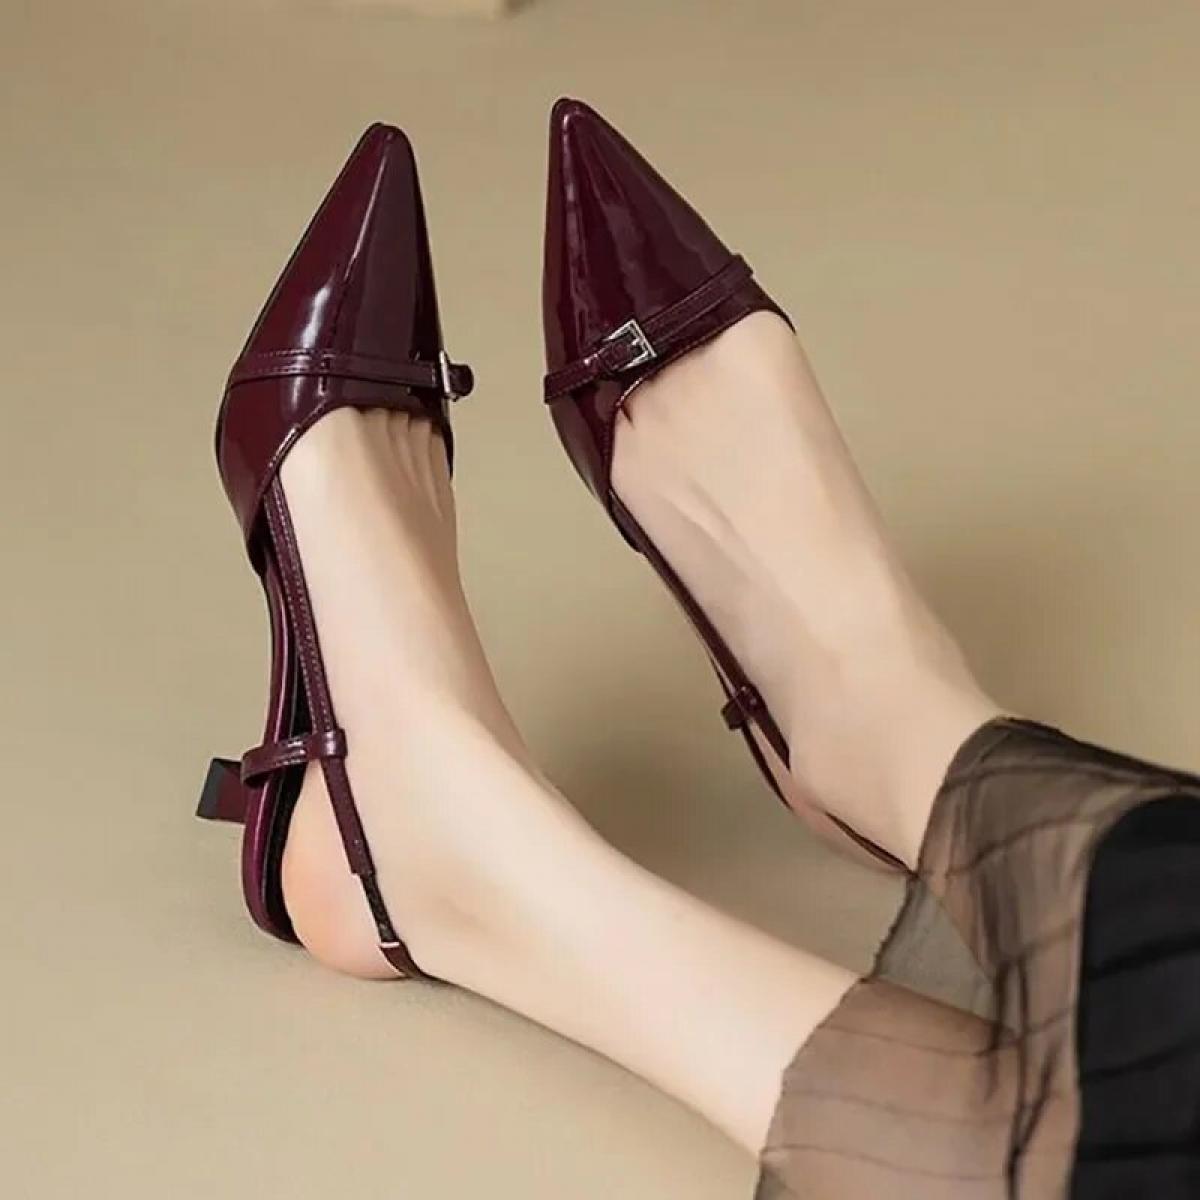 New Summer Women's Dress Shoes Pointed Toe Sandals Buckle Slingbacks Mid Heels Pumps Patent Leather Slip On